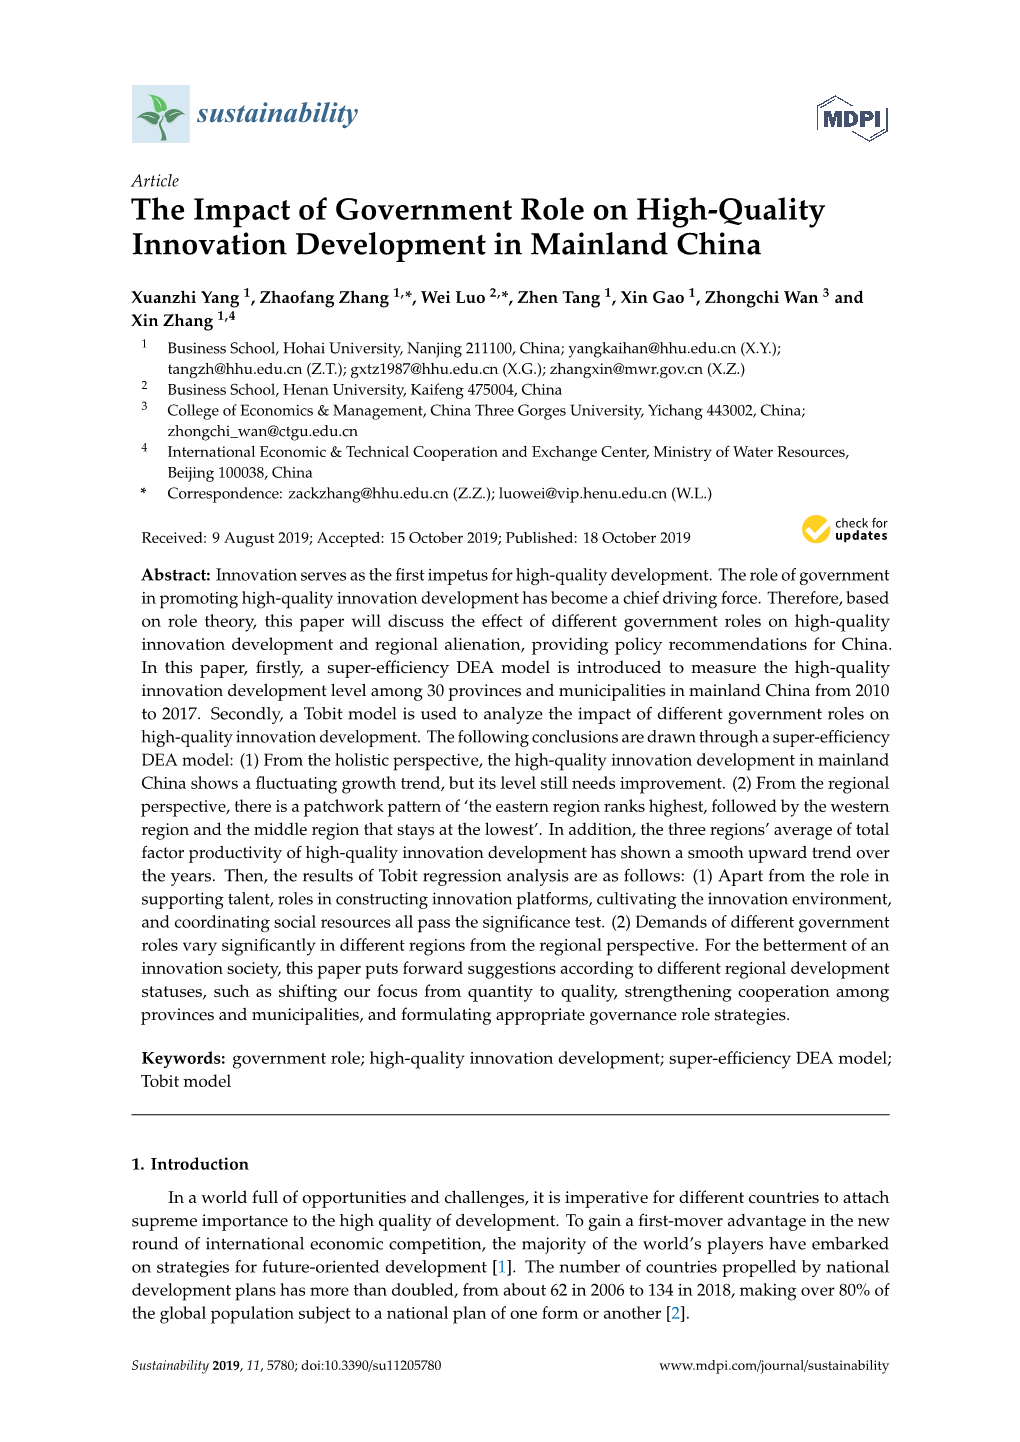 The Impact of Government Role on High-Quality Innovation Development in Mainland China